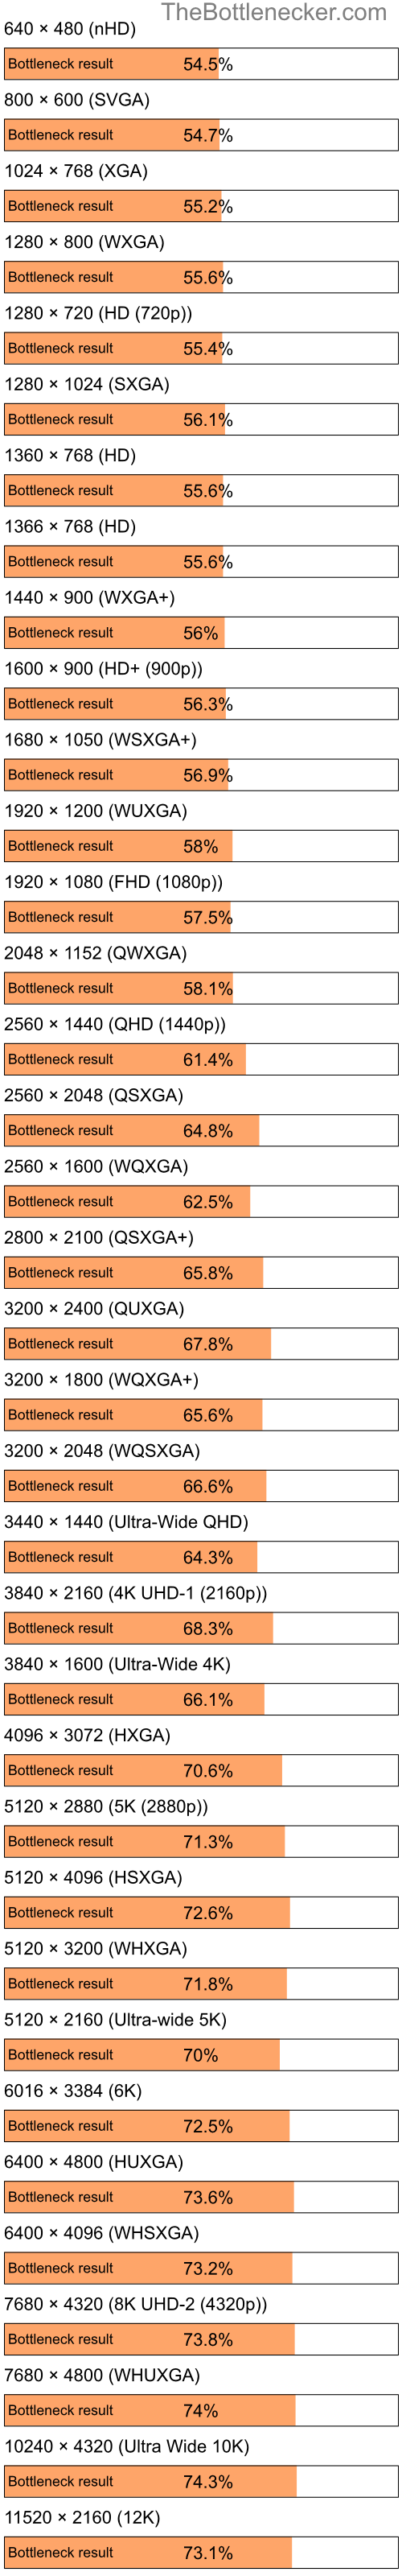 Bottleneck results by resolution for Intel Celeron and AMD Mobility Radeon HD 4200 in Processor Intense Tasks